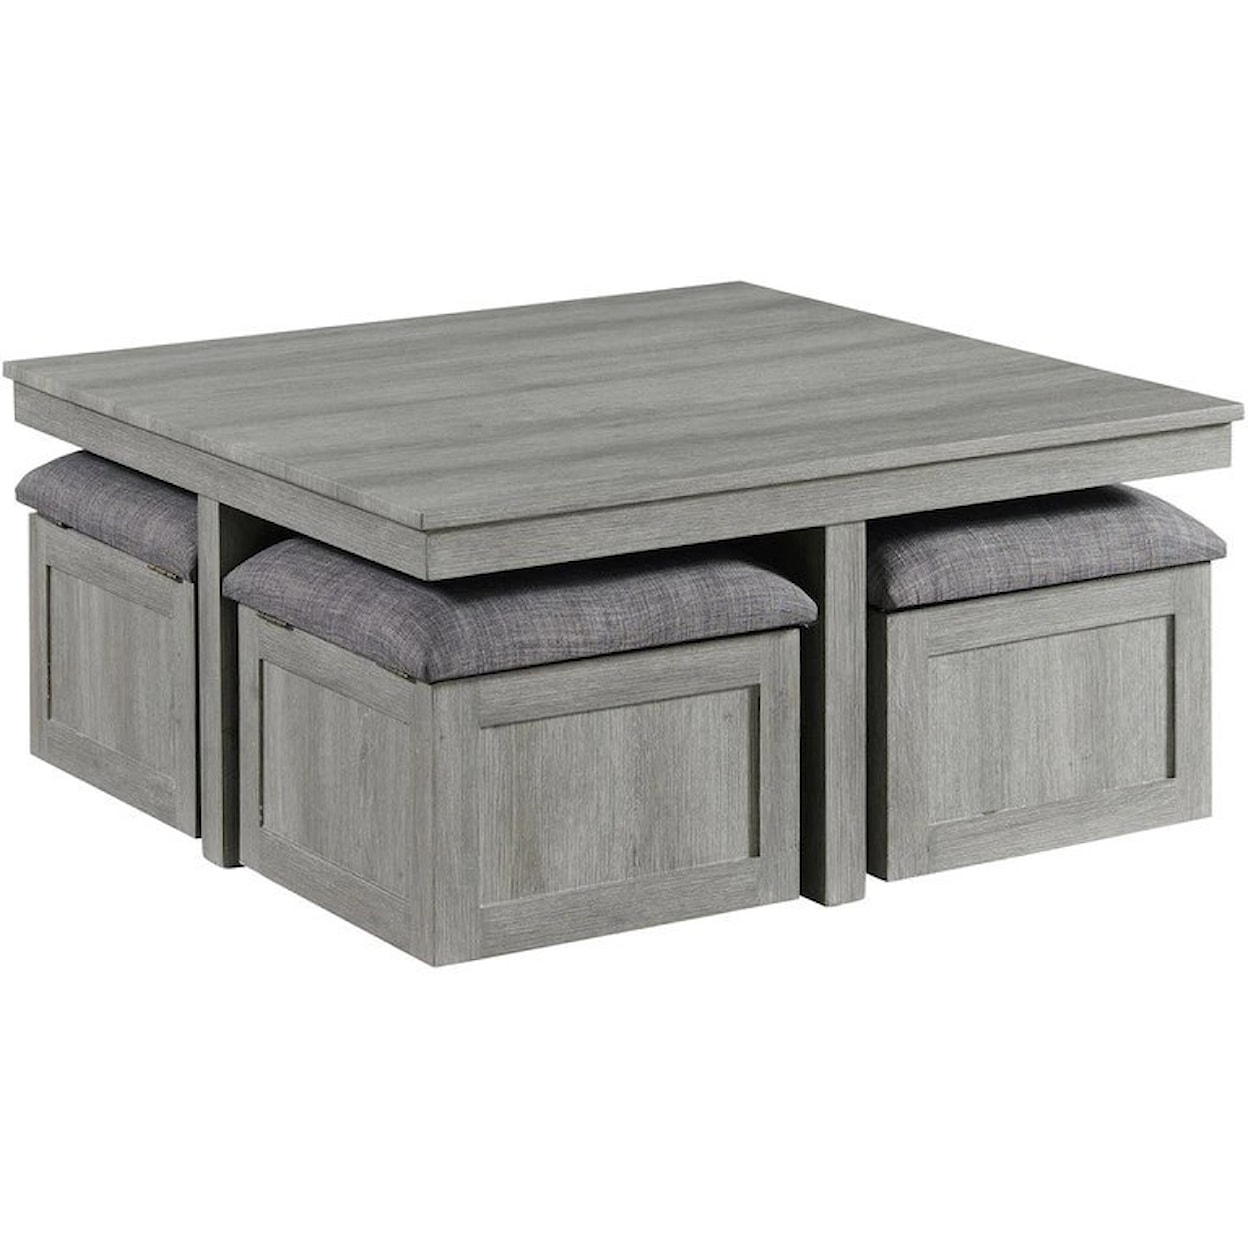 Elements International Uster Coffee Table with Nesting Stools